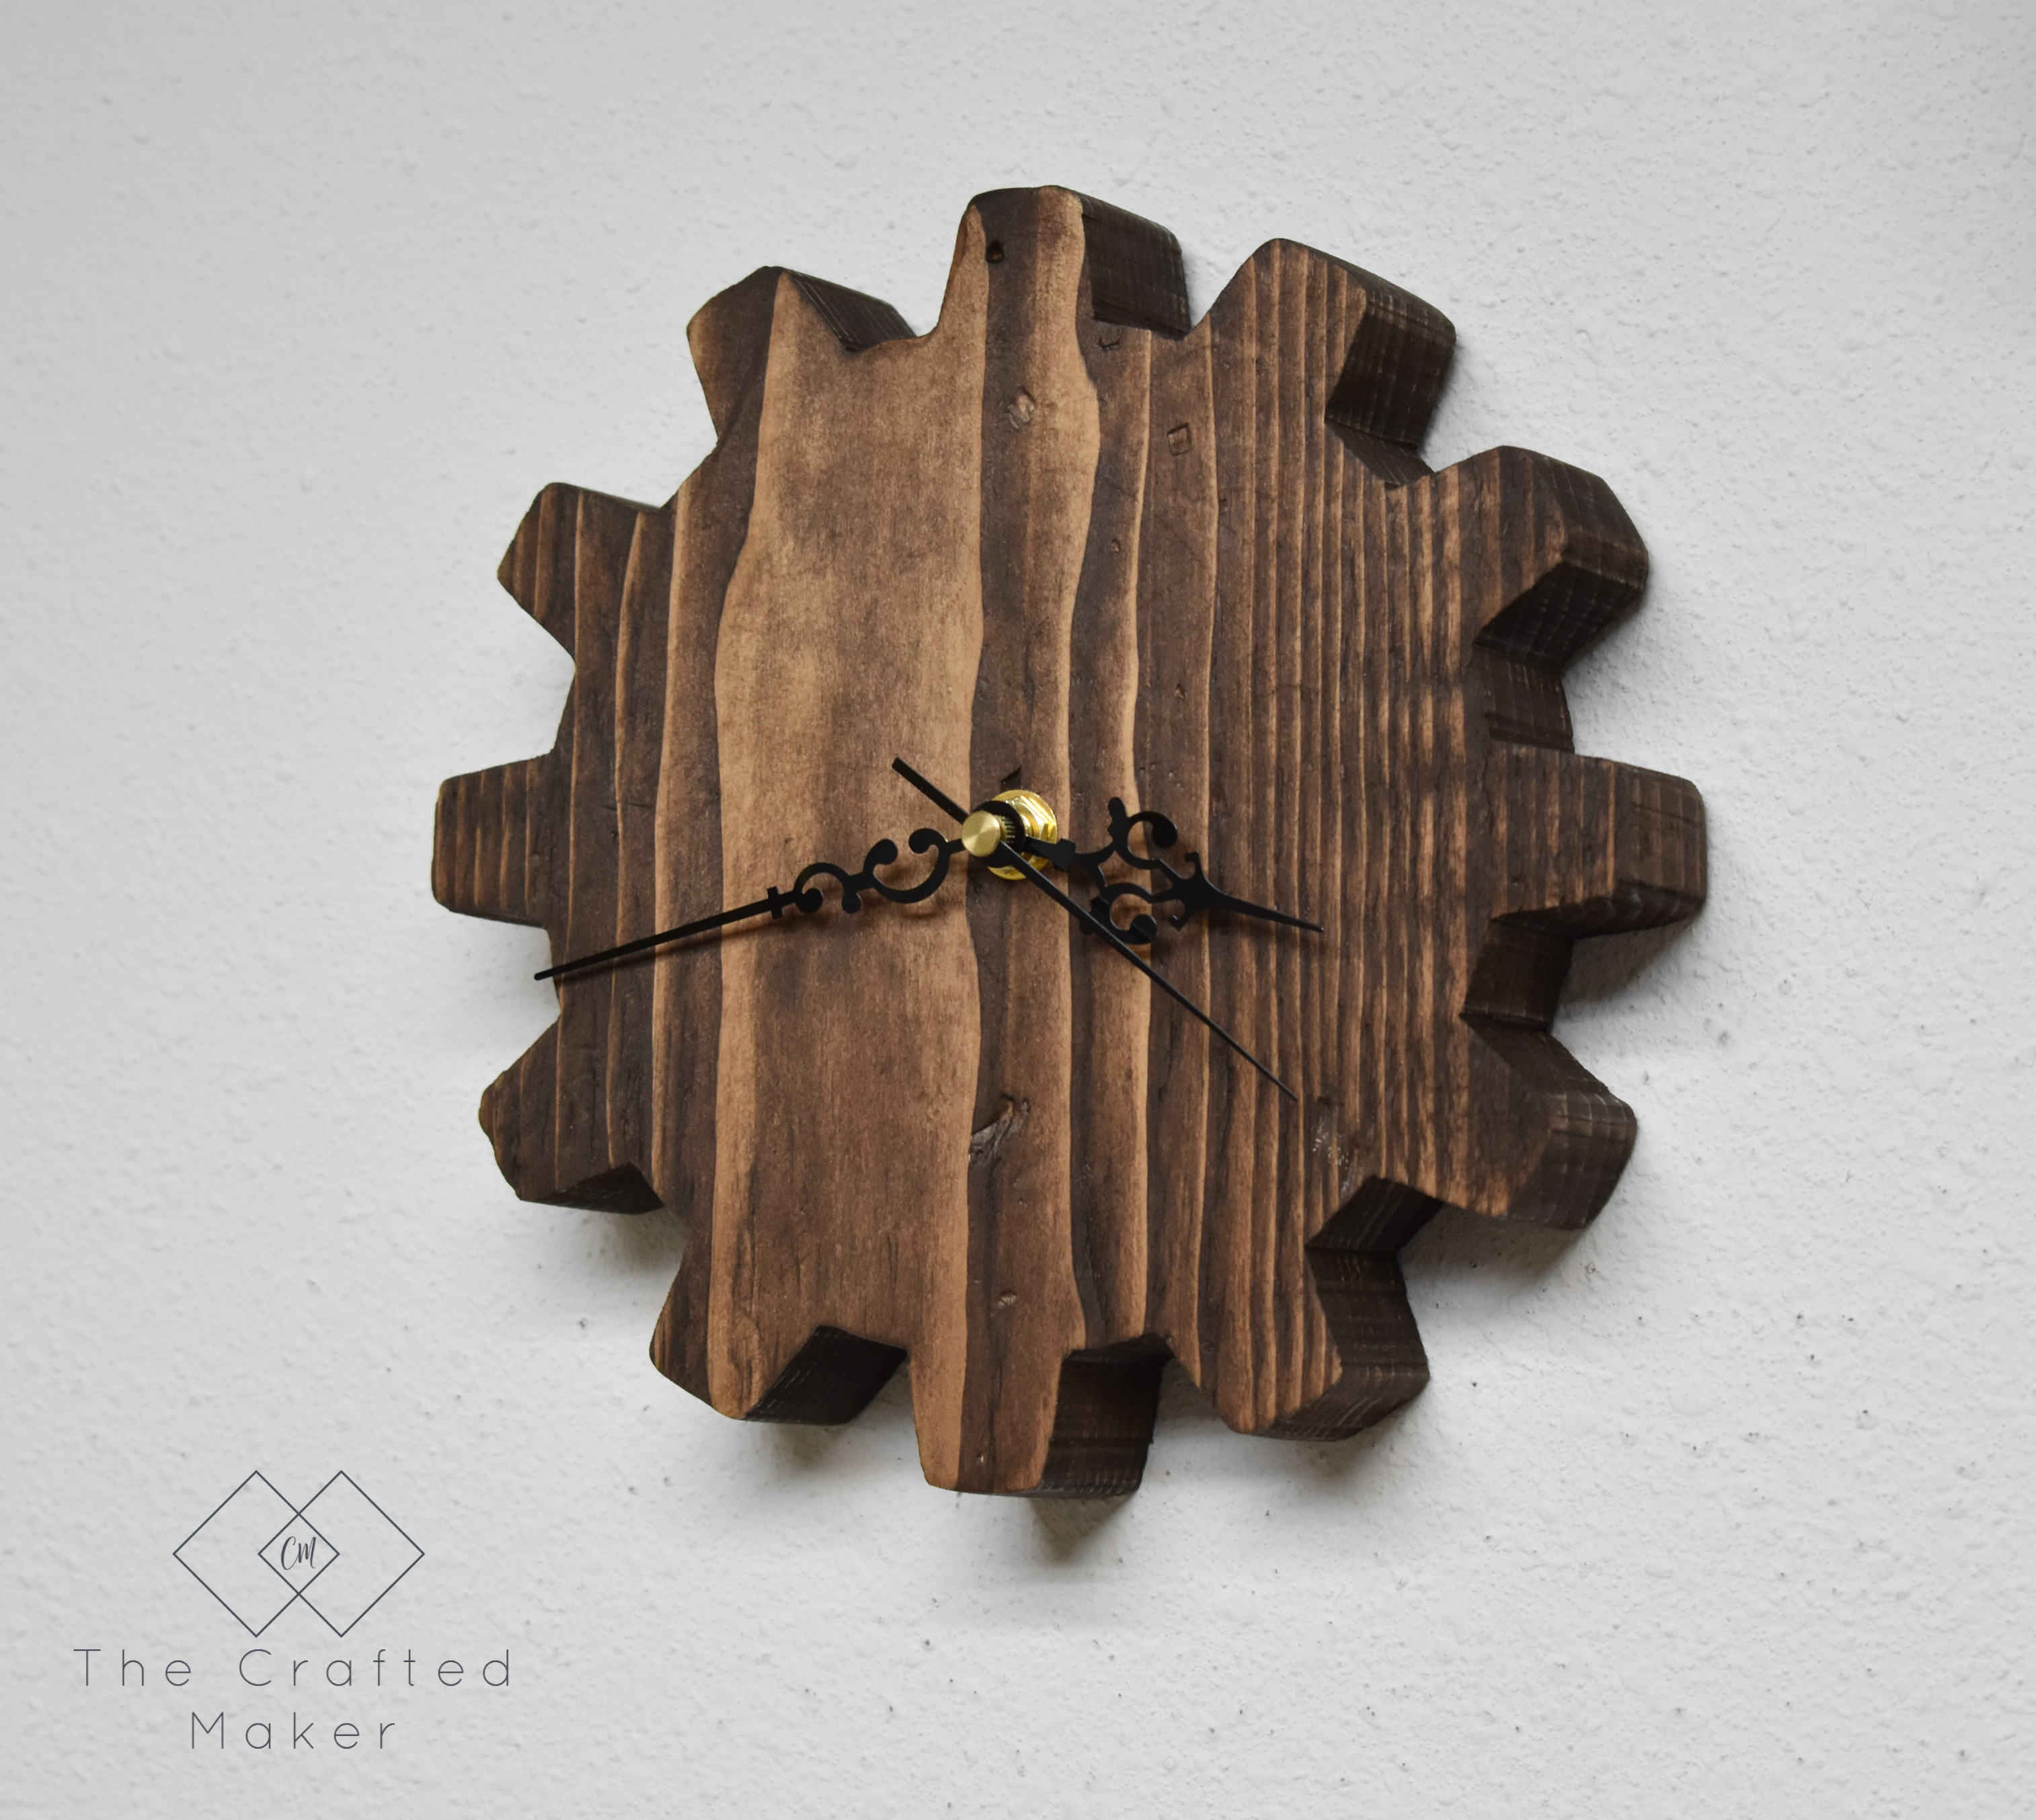 Give your workshop some character with this wooden gear wall clock. This is an easy DIY project that is completely customizable in size and design!